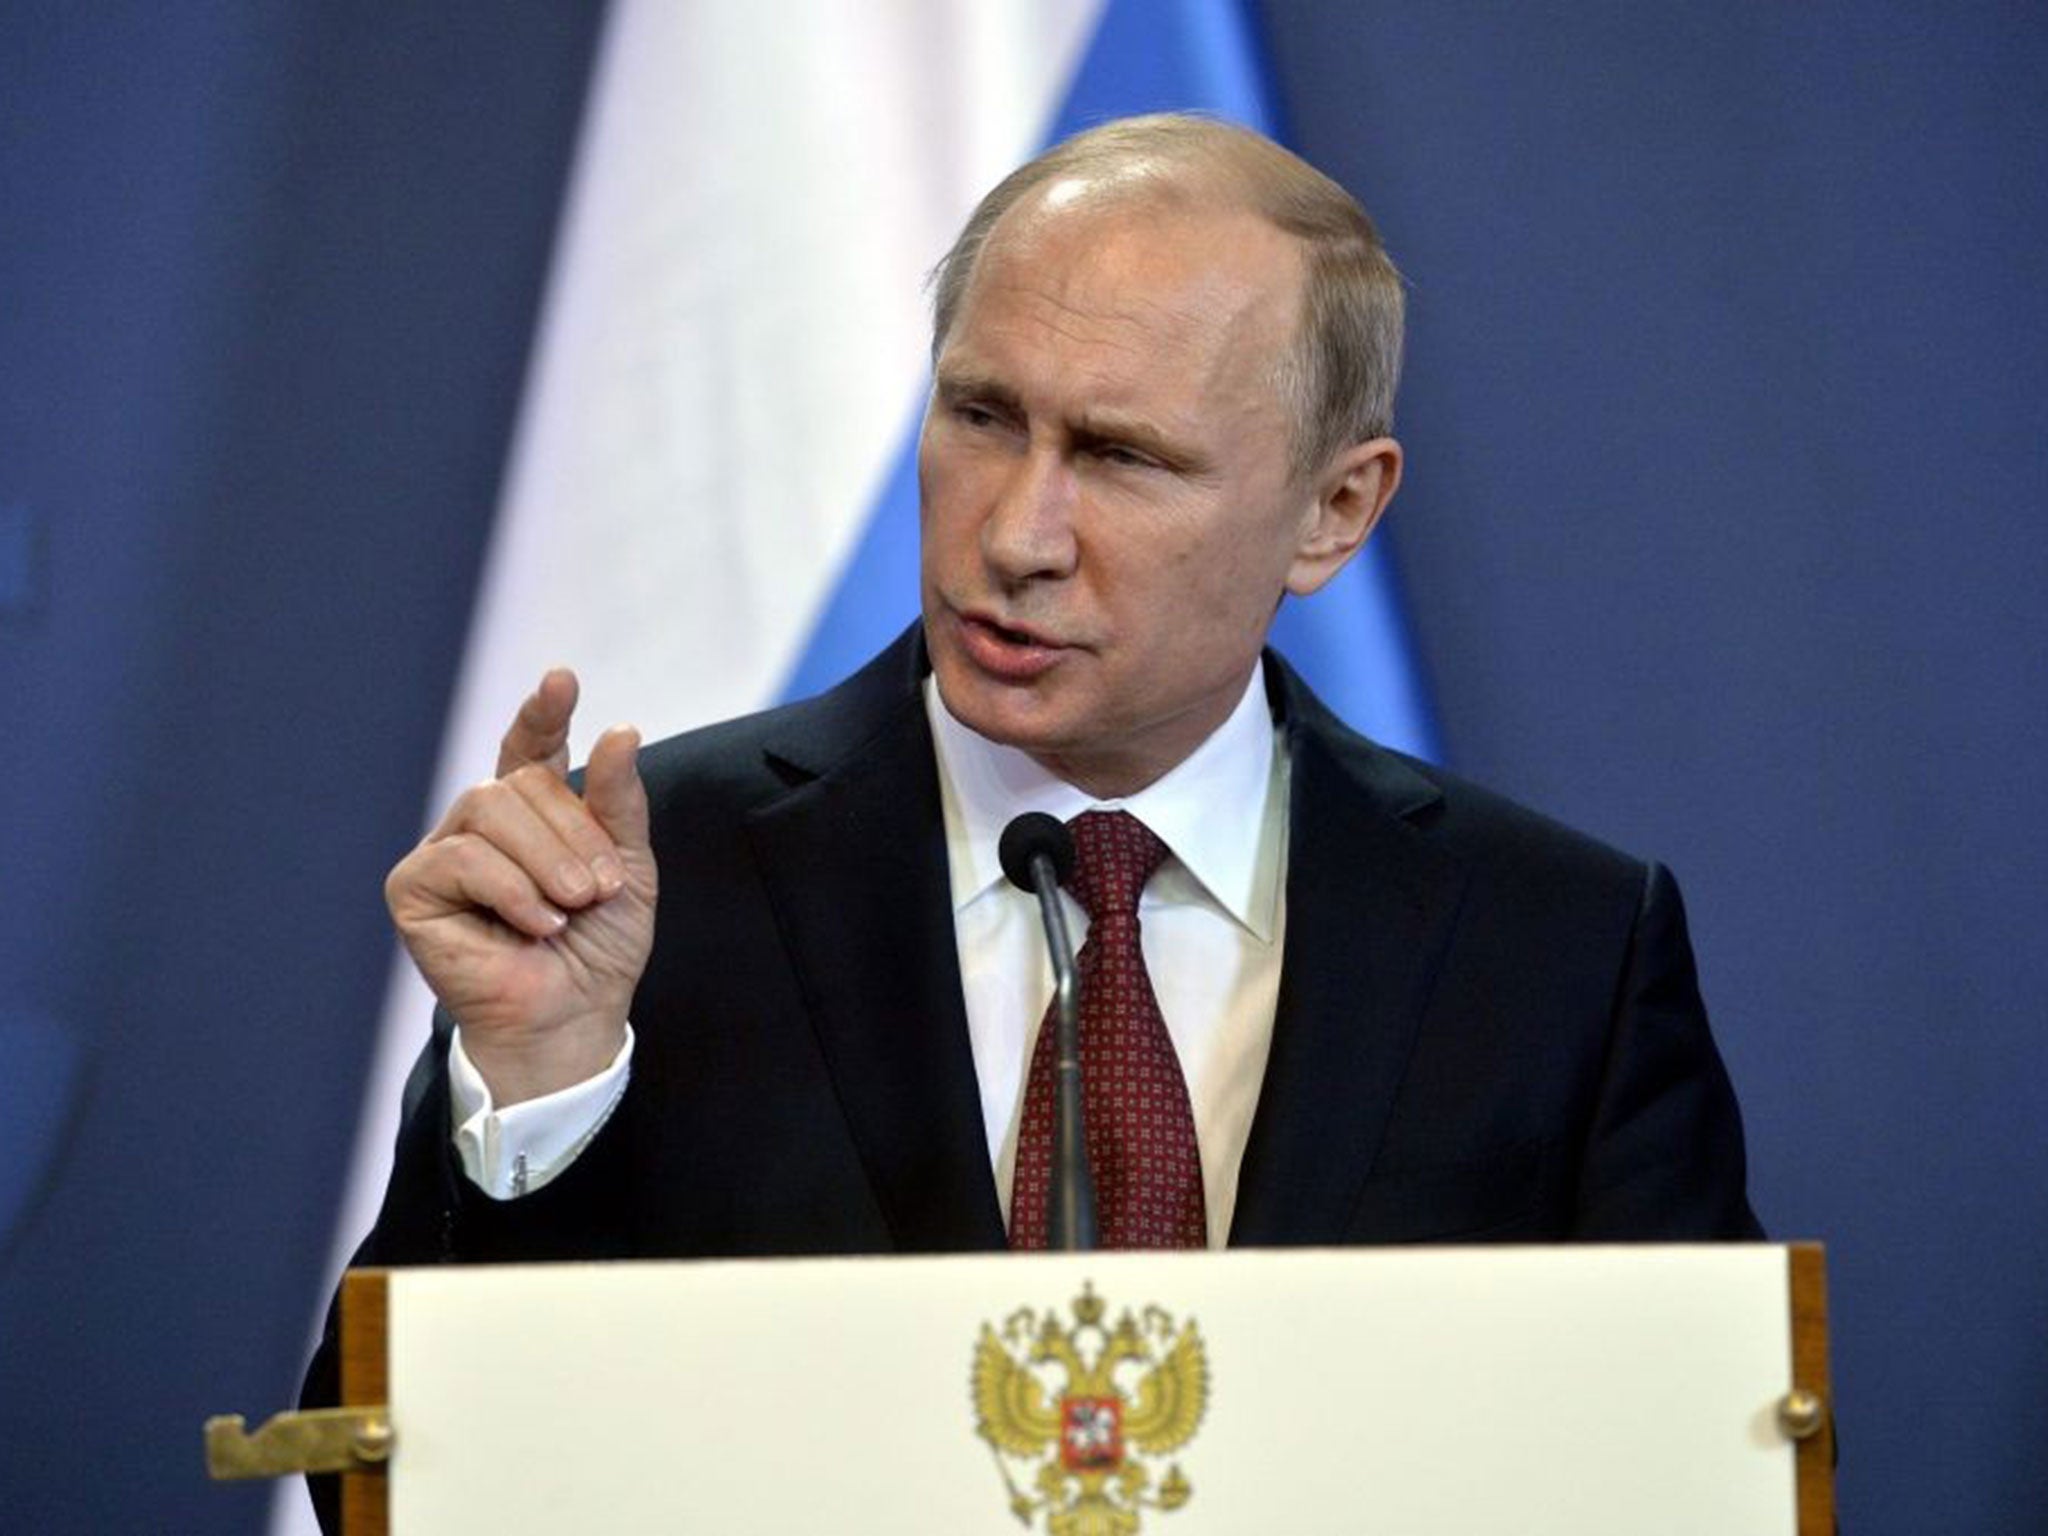 How can Vladimir Putin, who seems bent on a new Cold War, be contained?